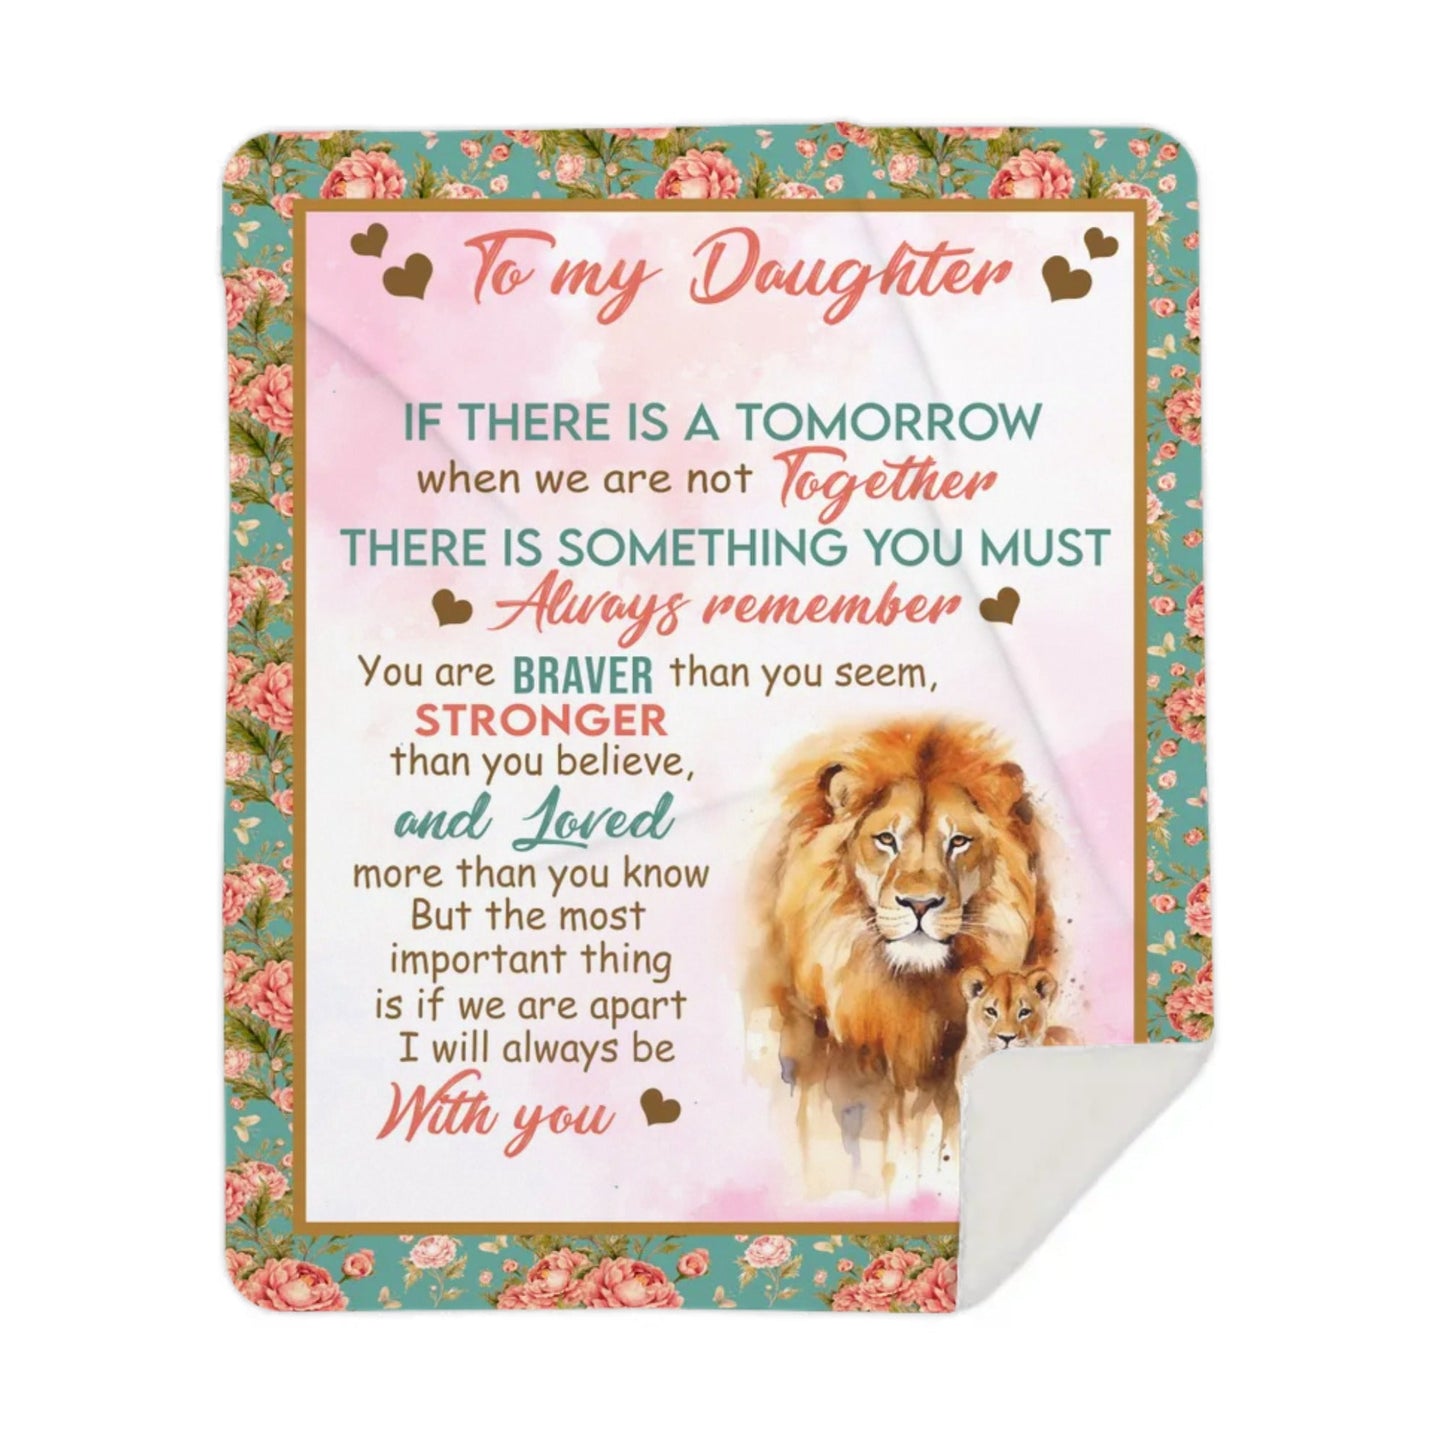 Personalized Gift for Daughter • Personalized Lion-themed Blanket with Message • Birthday Gift to Daughter from Dad or Mom • Christmas or Special Occasions – With or Without Name